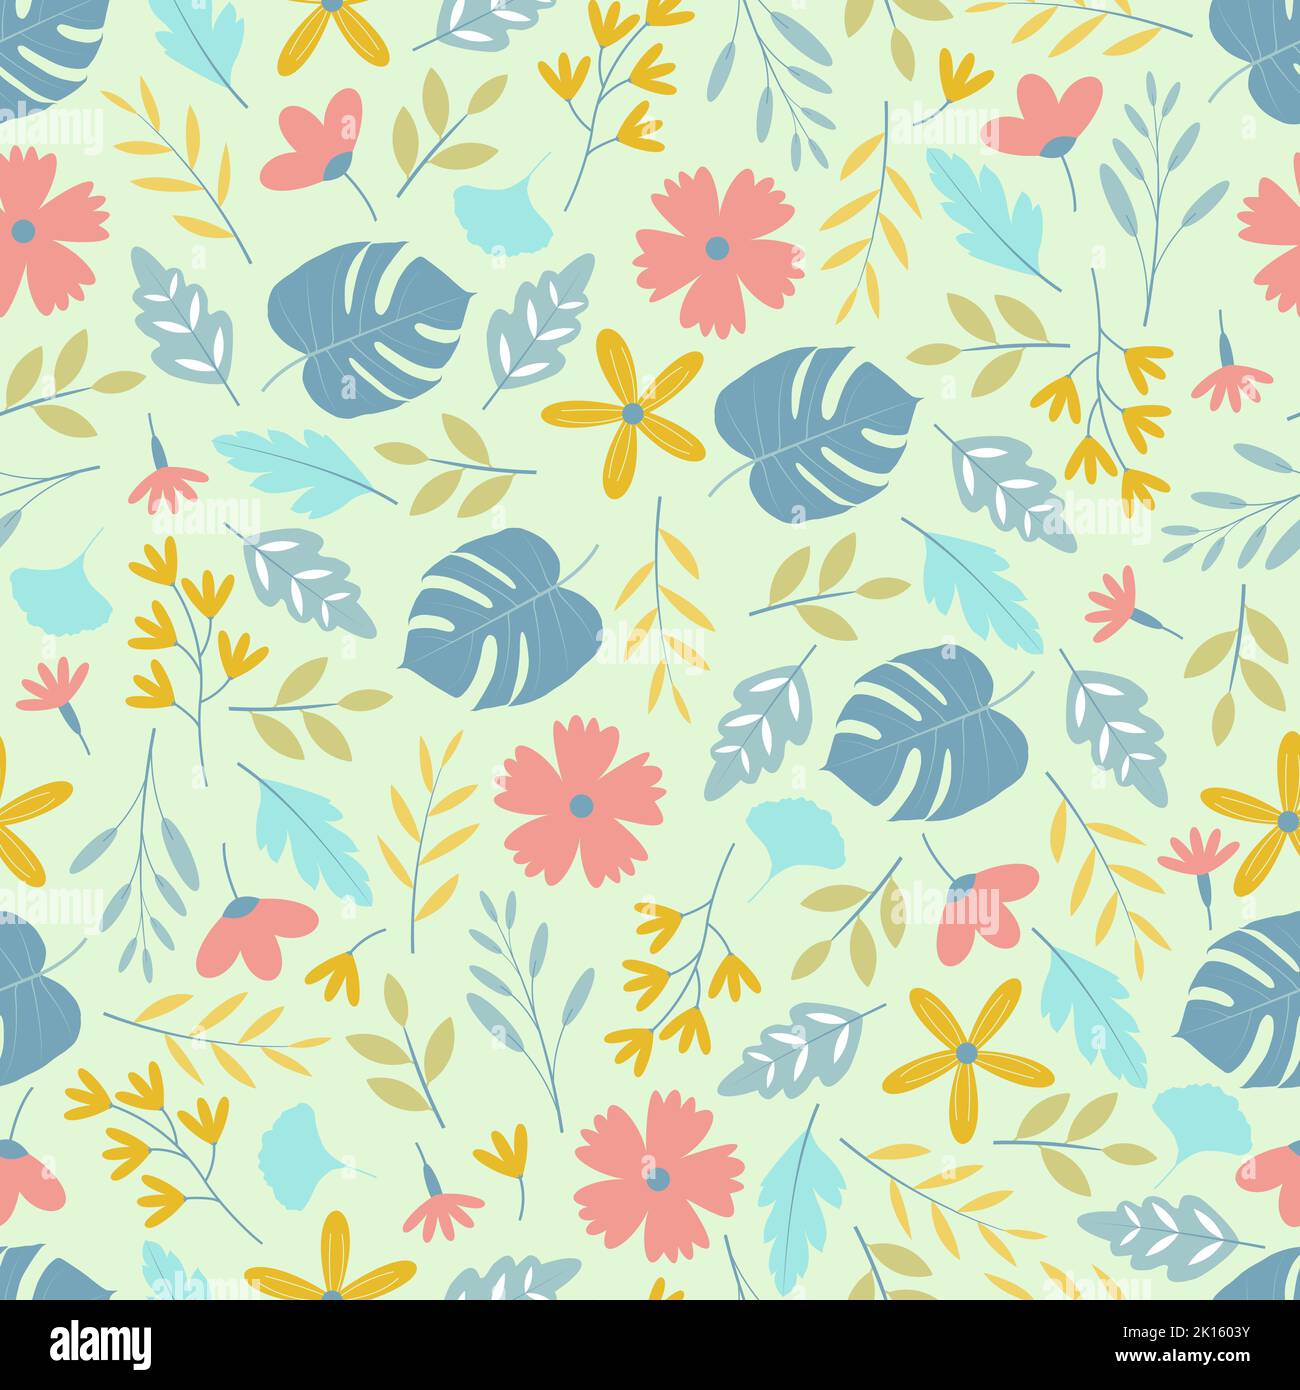 Ornamental ditsy floral seamless pattern design. Repeating texture of blooming flowers and leaves. Background for surface printing Stock Vector